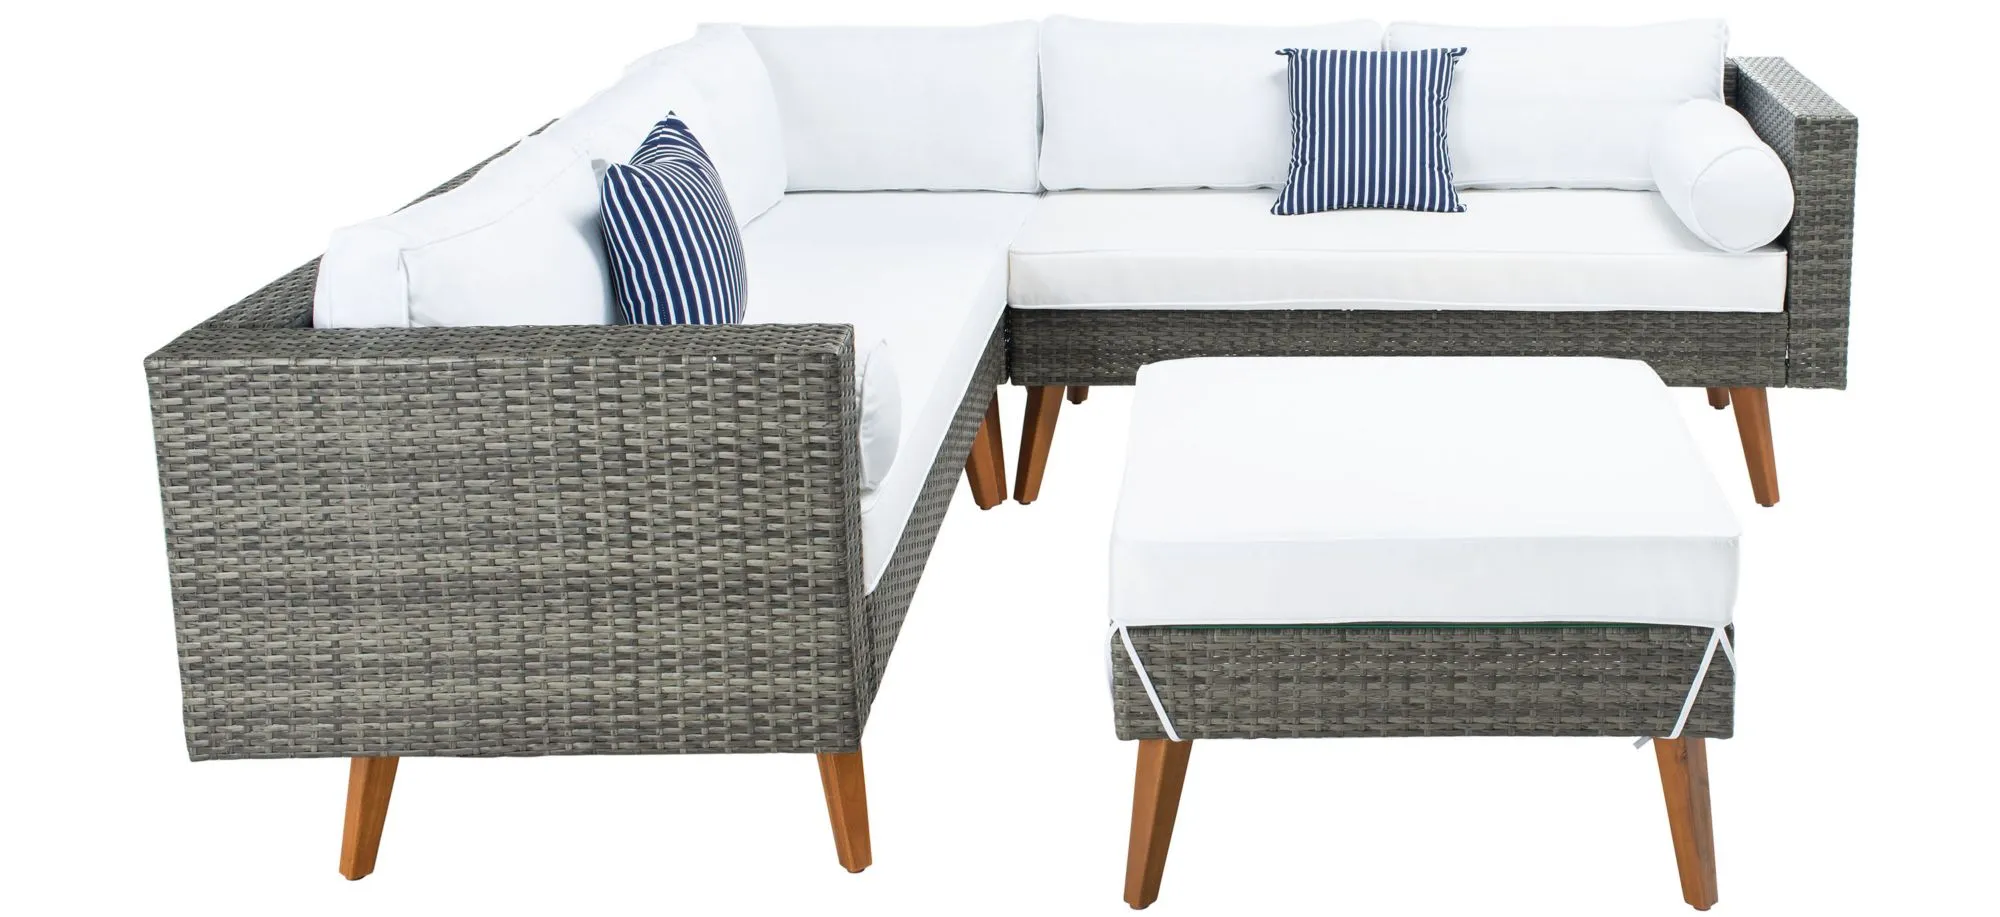 Lynwood 3-pc. Outdoor Sectional Set in Ivory by Safavieh